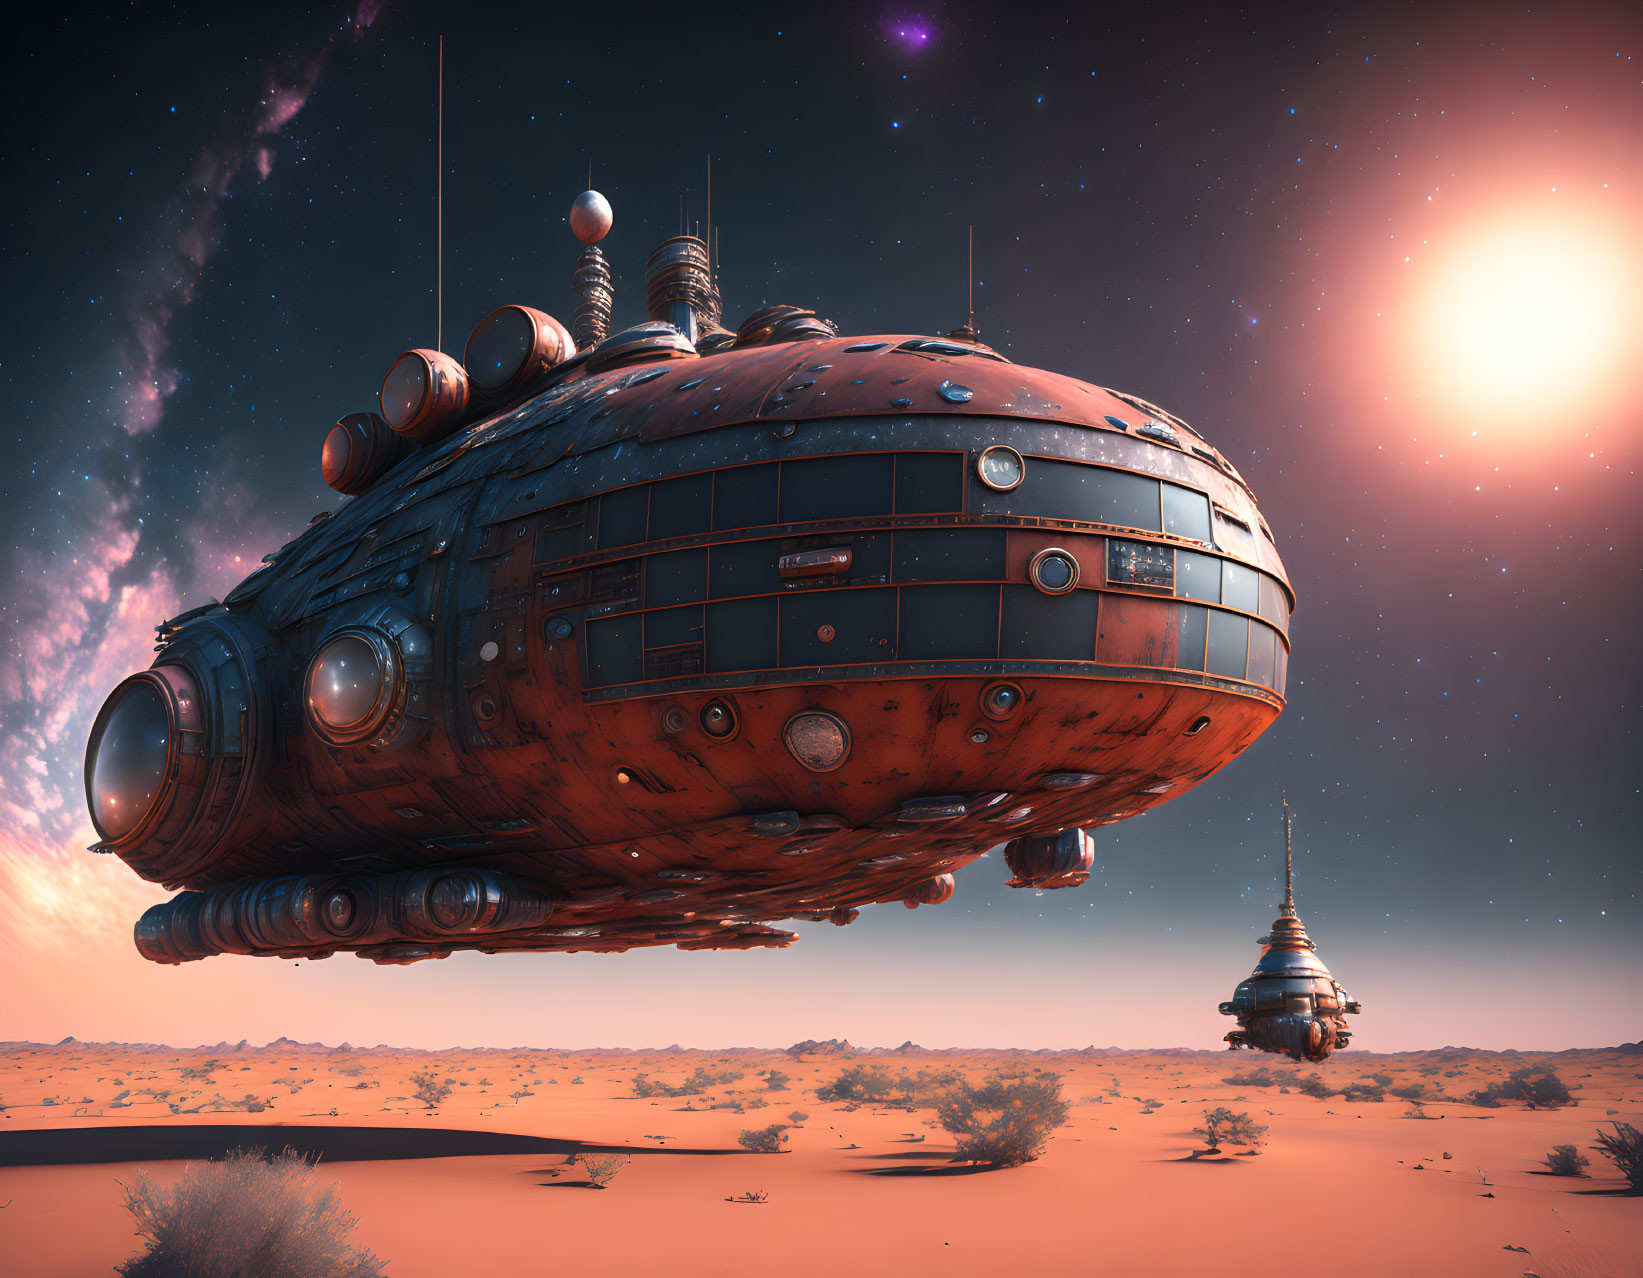 Rusted spaceship above desert landscape with bright sun